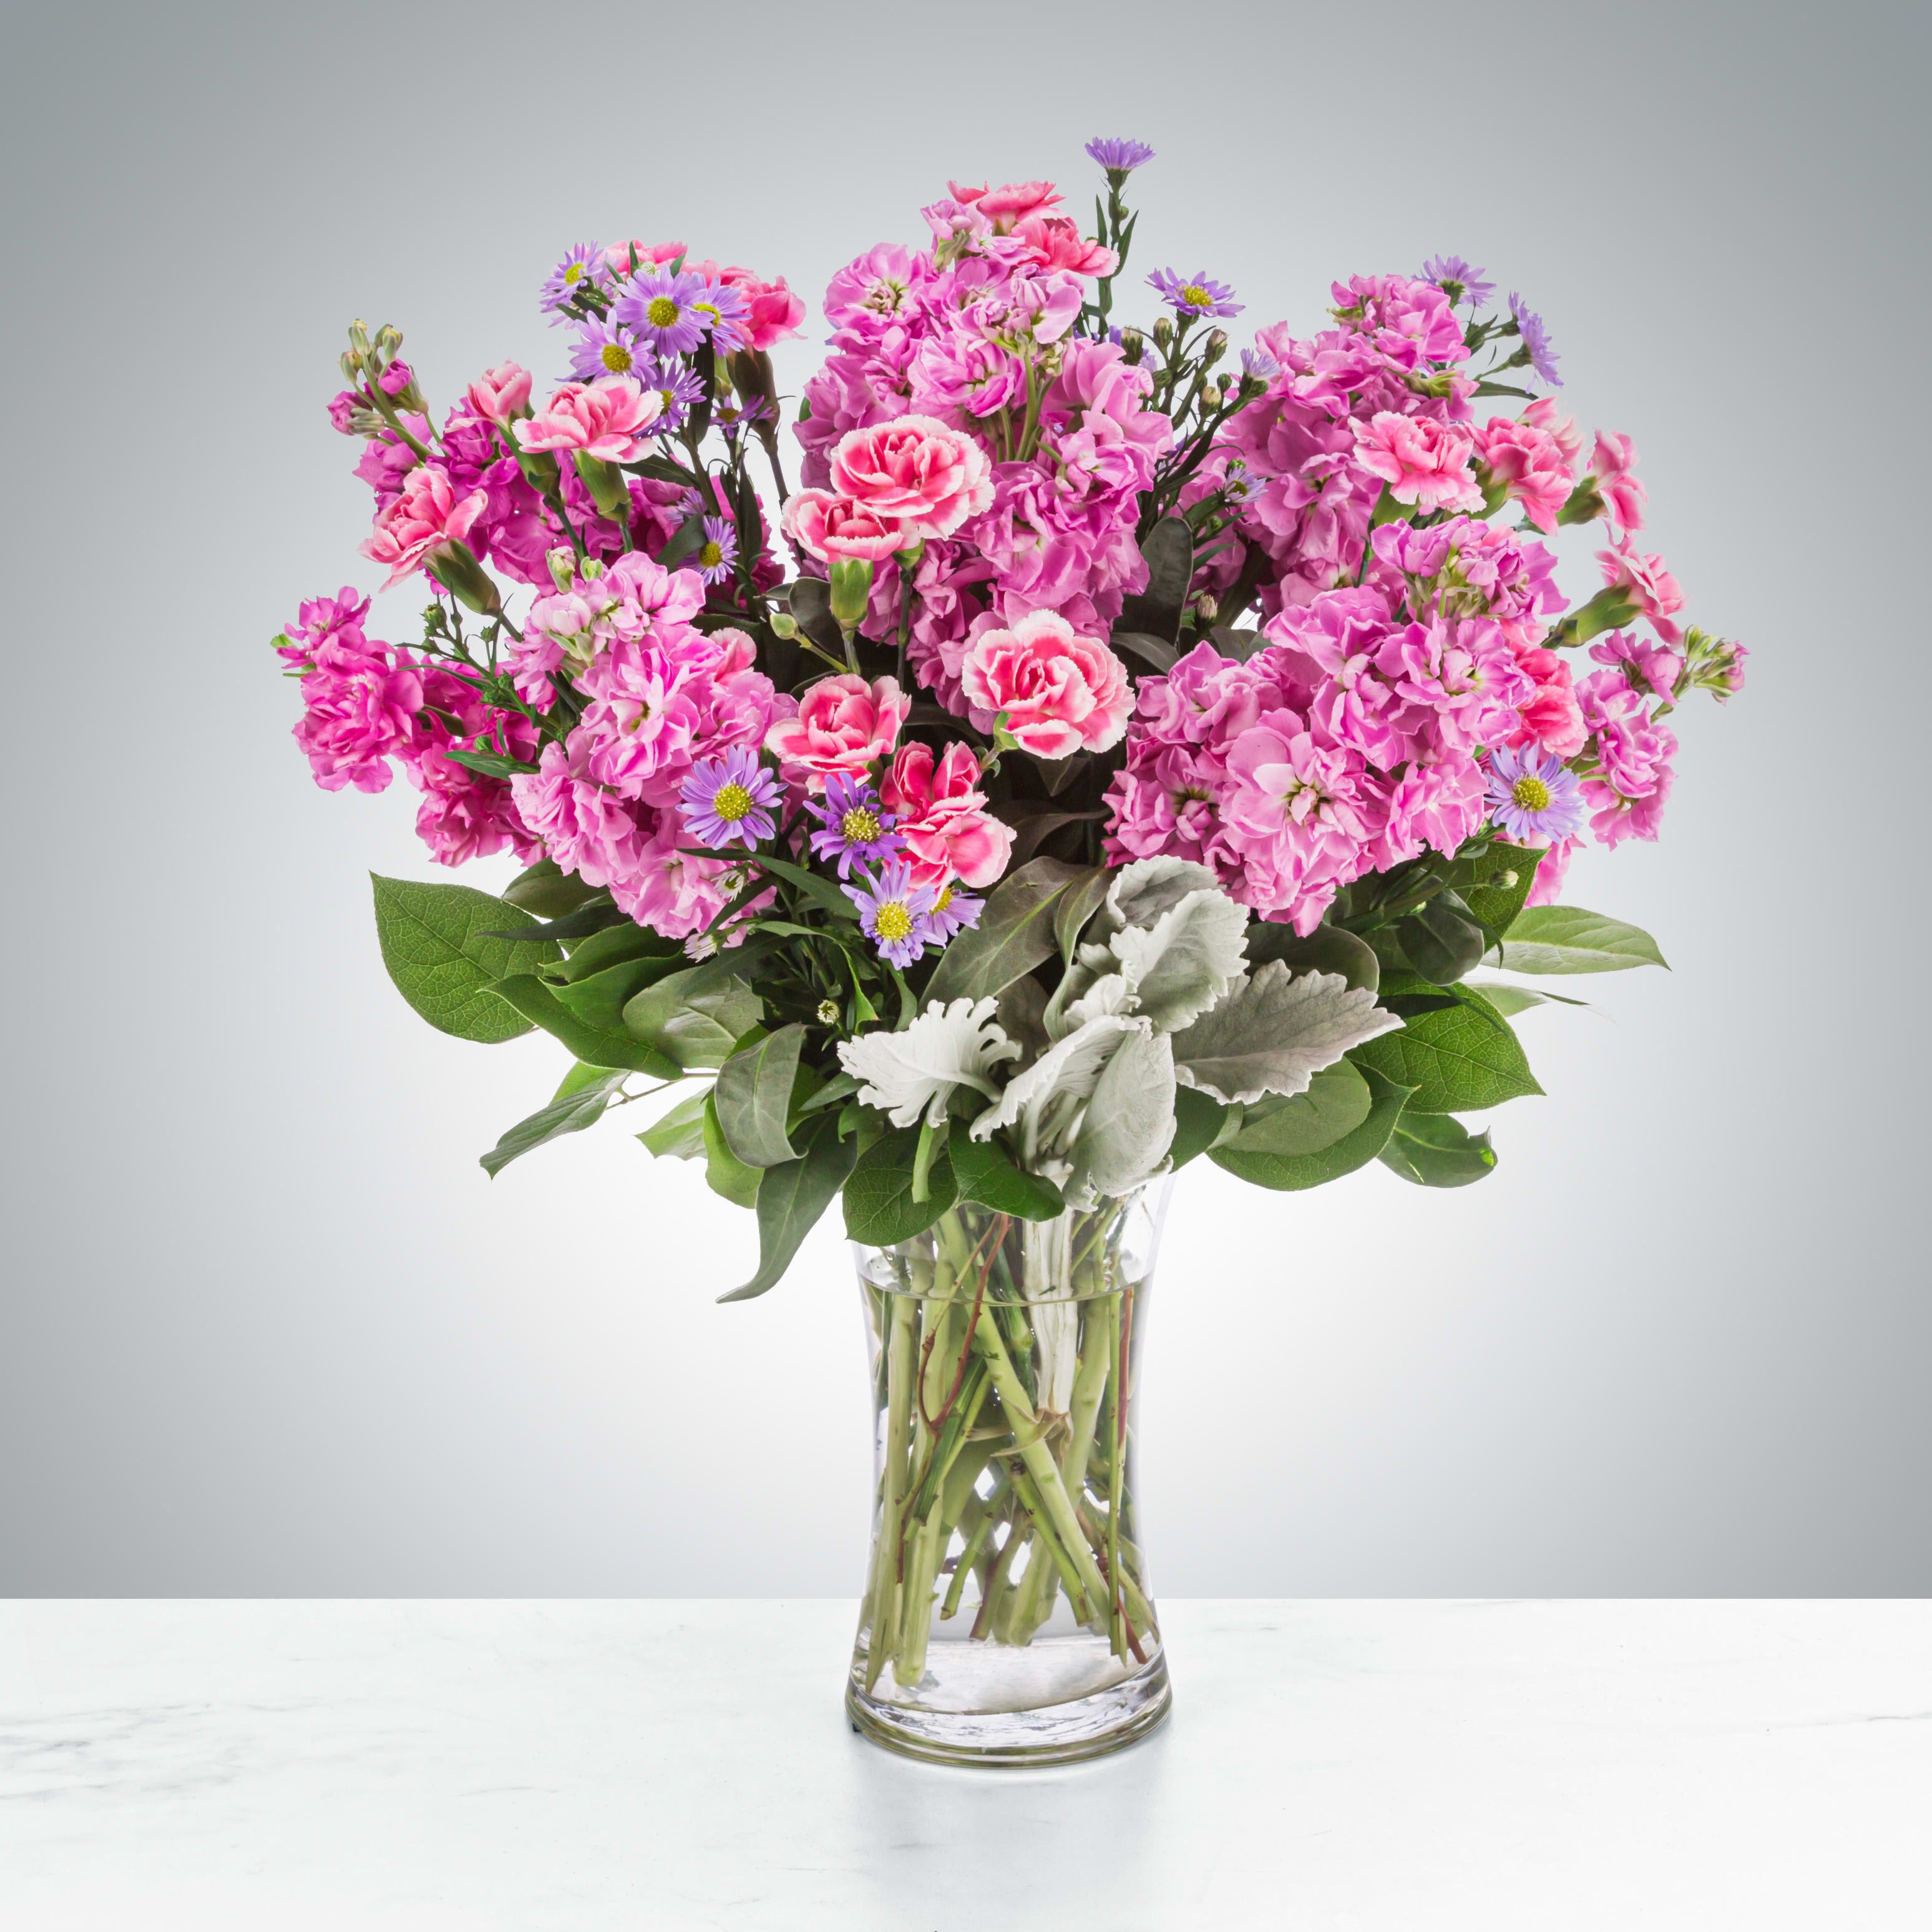 Uptown Girl  - This arrangement is a pink and purple confection featuring sweet-smelling stock flowers and purple asters. A great gift for birthdays, women's day, or breast cancer awareness month.  Approximate Dimensions: 12&quot;D x 17&quot;H